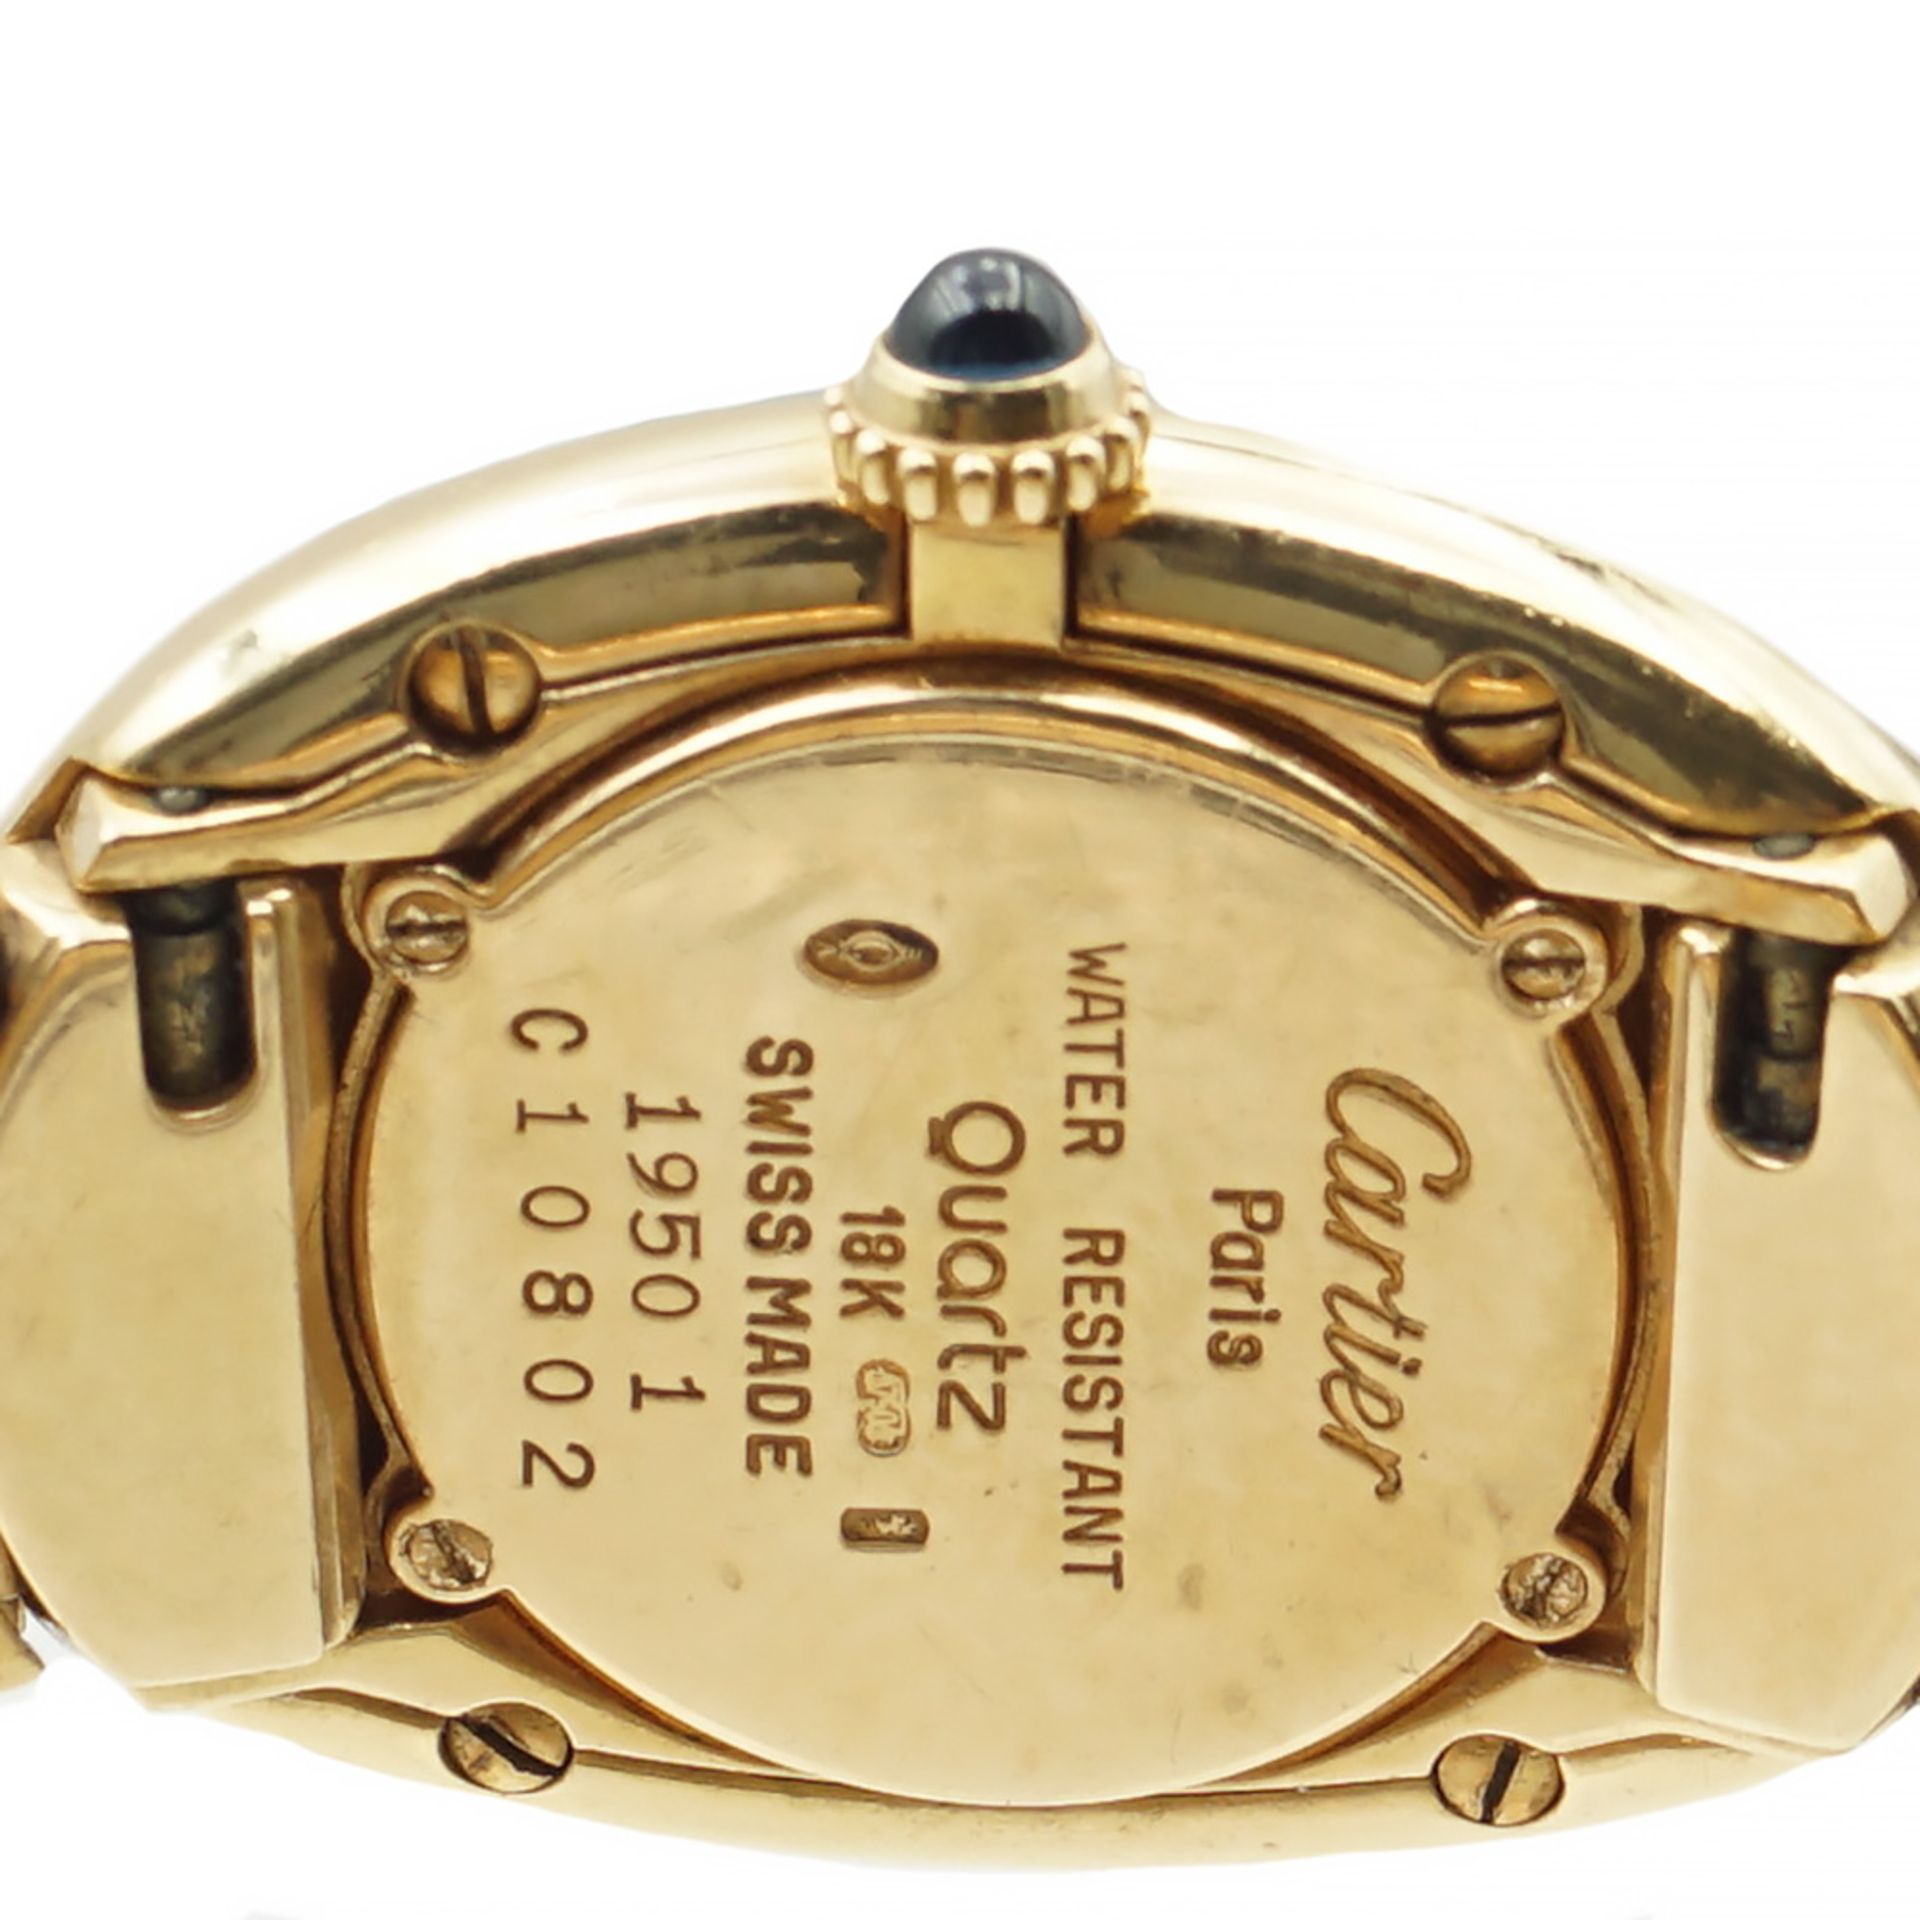 Cartier Baignoire, ladies watch 1993 weight 78,7 gr - Image 3 of 3